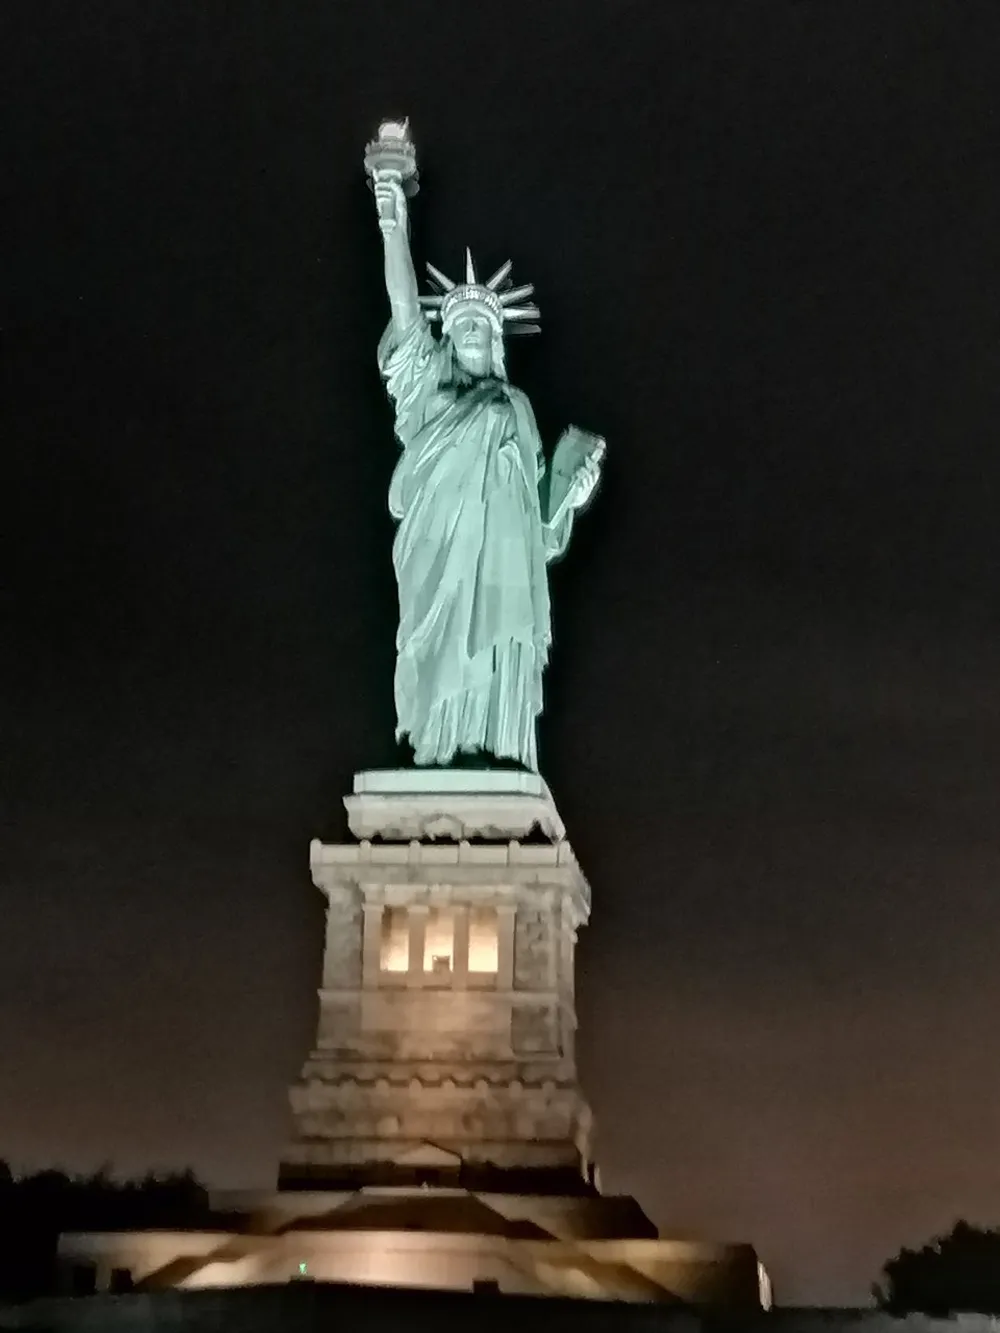 The image is a nighttime photo of the Statue of Liberty illuminated against a dark sky